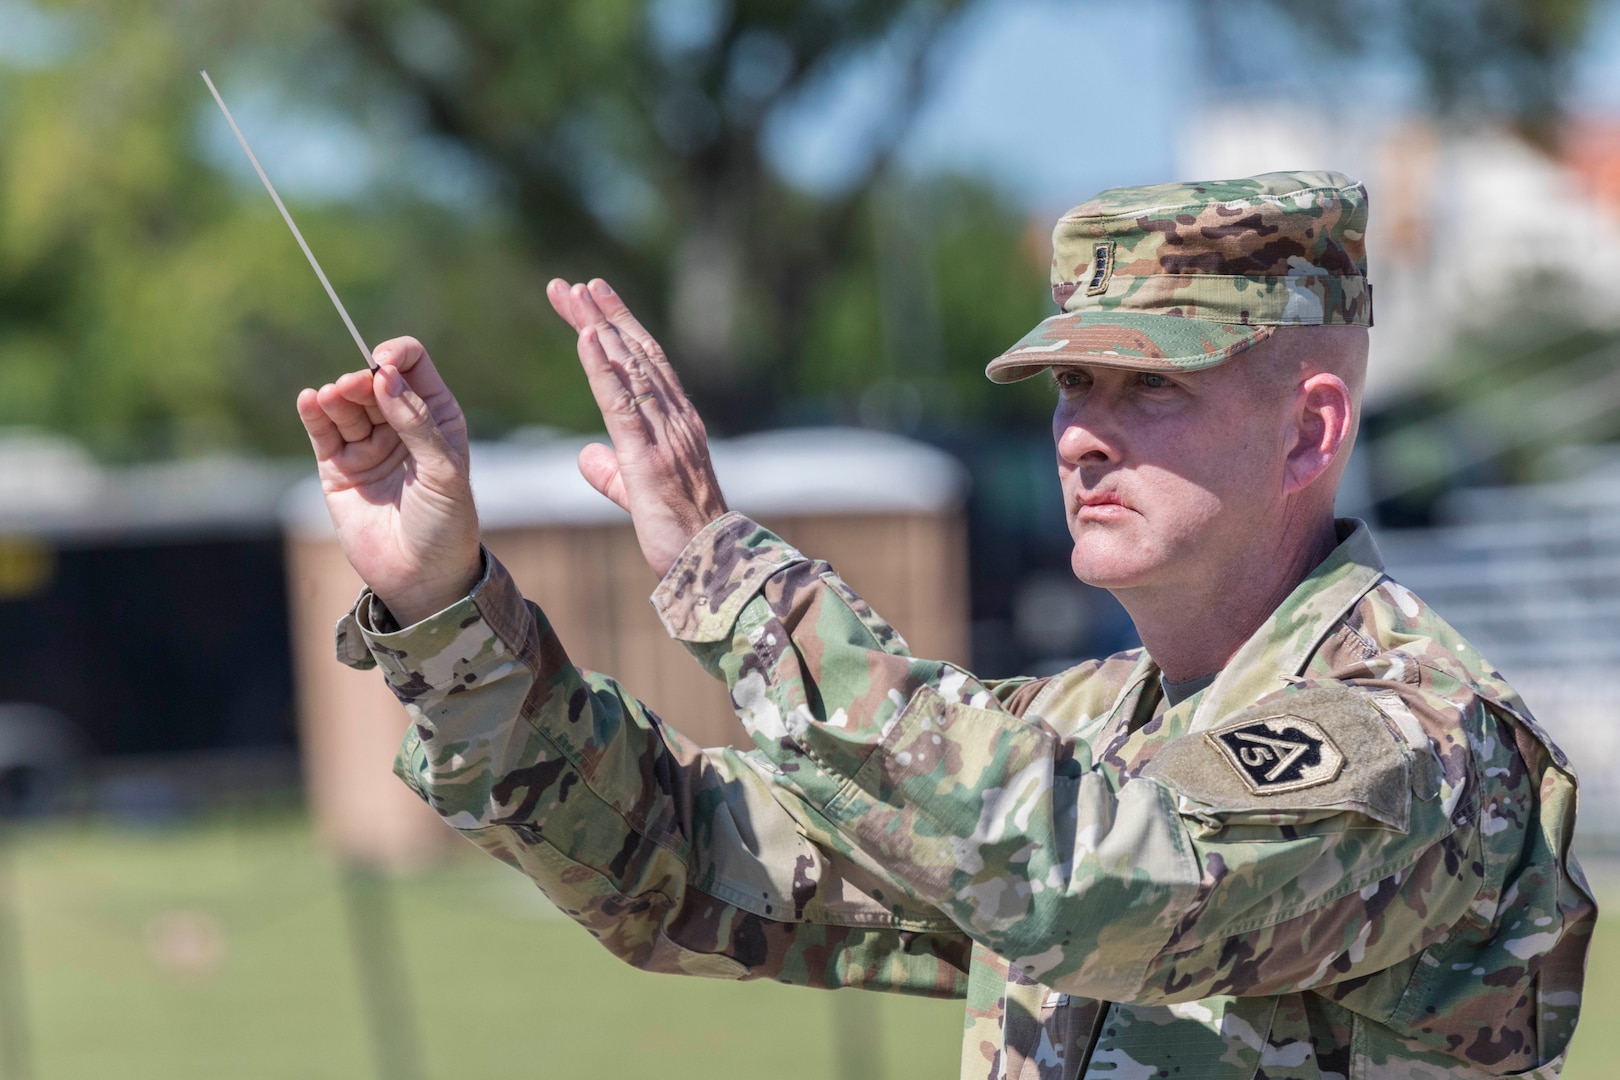 The 323d Army Band “Fort Sam’s Own” conductor leads the band during the annual Military Appreciation Weekend May 6, 2017 at Joint Base San Antonio-Fort Sam Houston, Texas. U.S. Army North and JBSA hosted the two-day event, which featured music, family activities, and various military demonstrations. This year, the appreciation weekend also commemorated the 300th anniversary for the city of San Antonio. (U.S. Air Force photo by Ismael Ortega / Released)